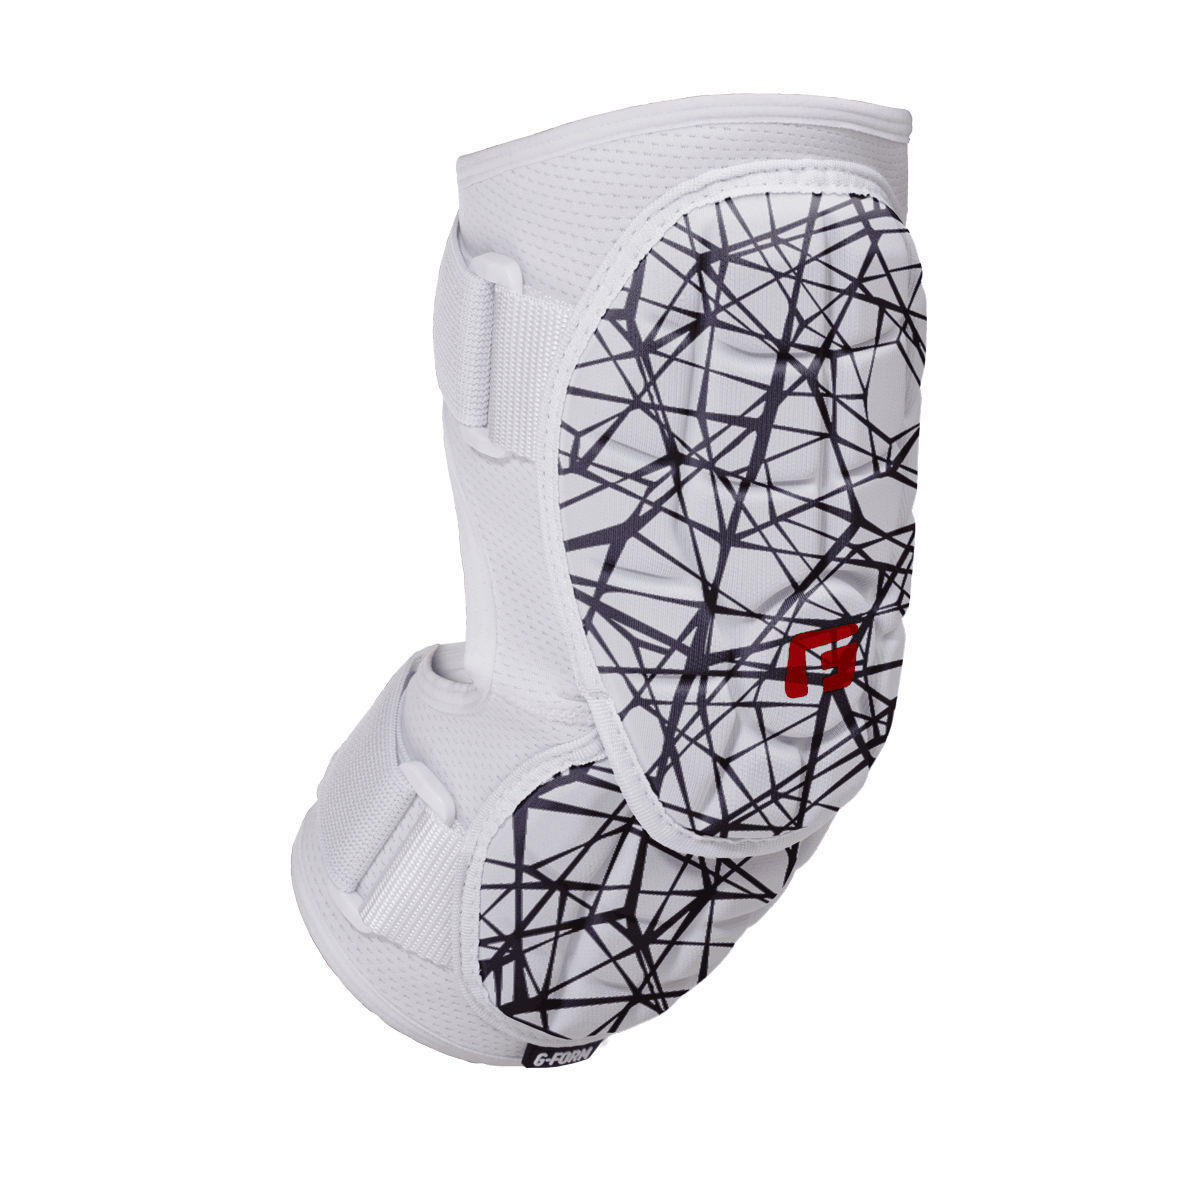 Elite 2 Batter's Elbow Guard - Limited Edition